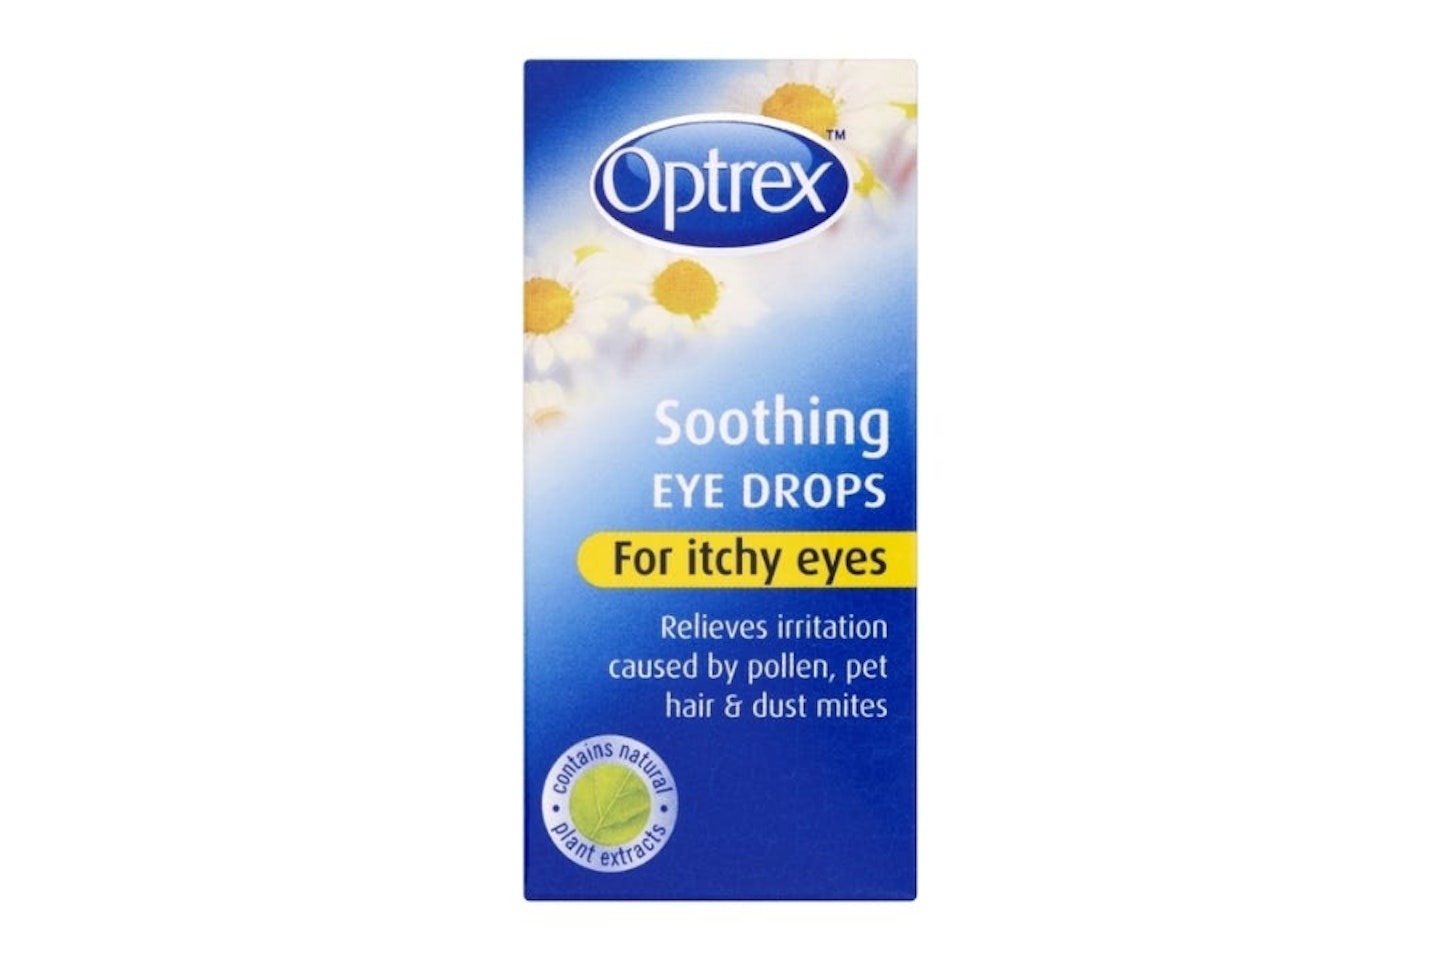 Optrex Soothing Eye Drops for Itchy Eyes 10ml - one of the best hay fever eye drops